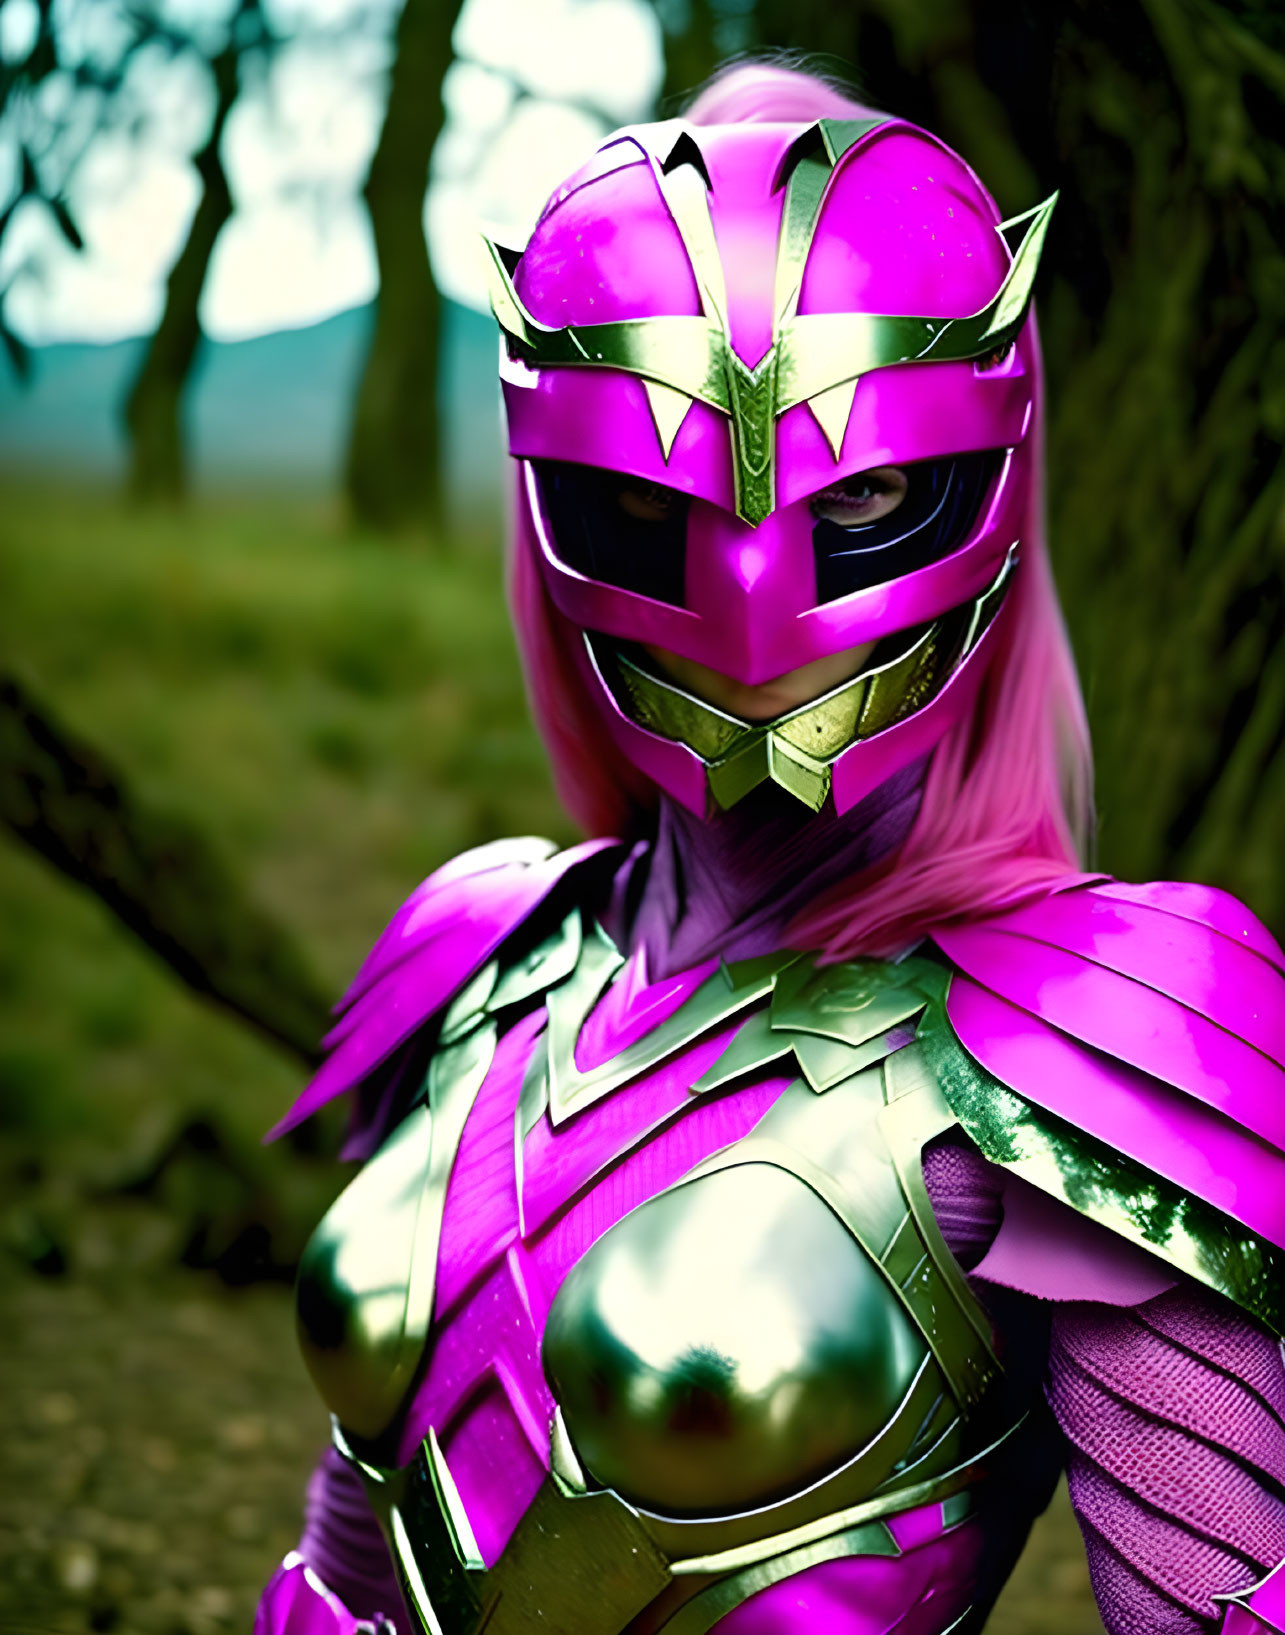 Vibrant pink and metallic Power Ranger costume in wooded area